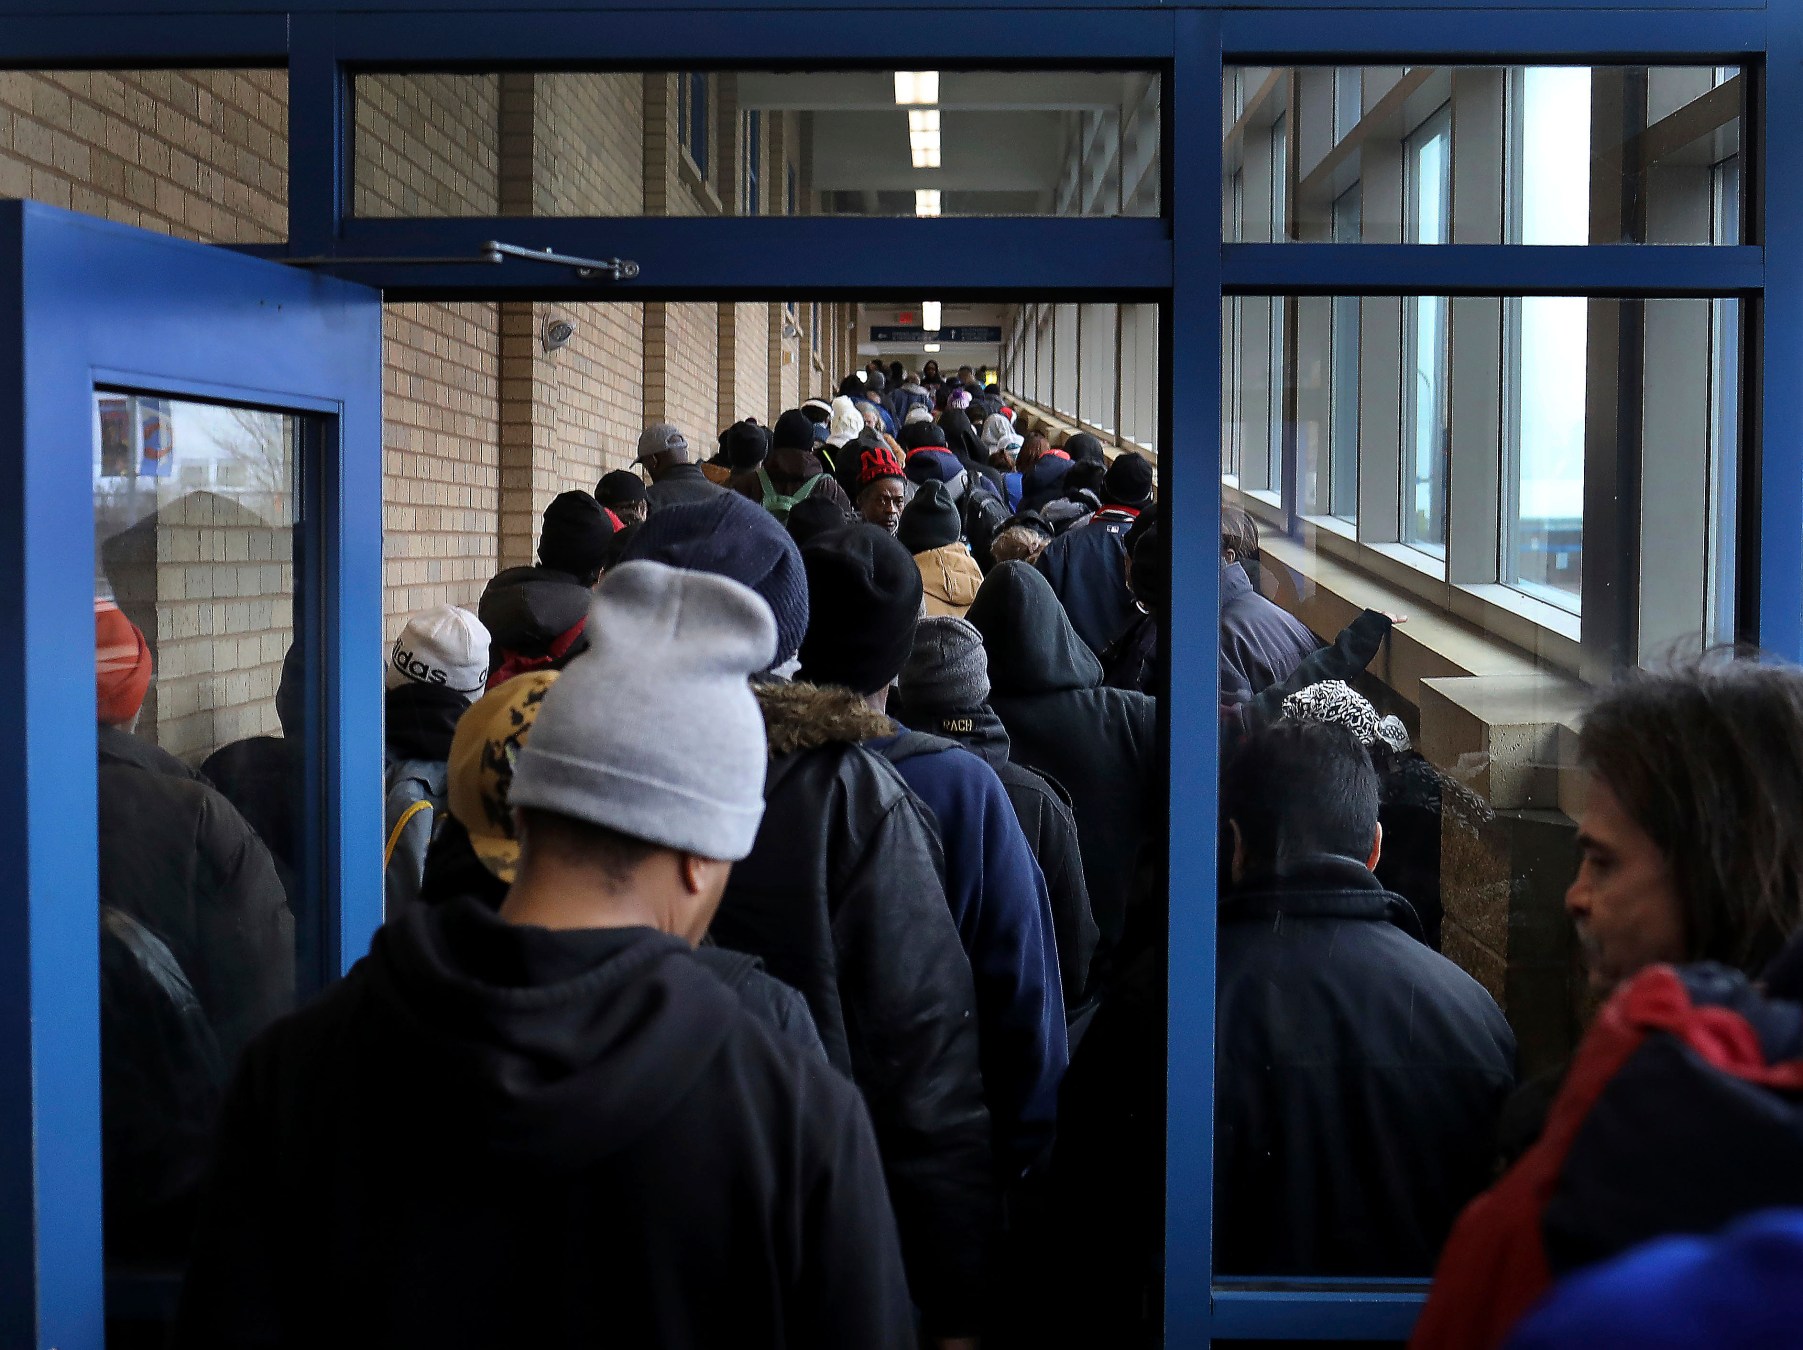 These Photos Show the Staggering Food Bank Lines Across America